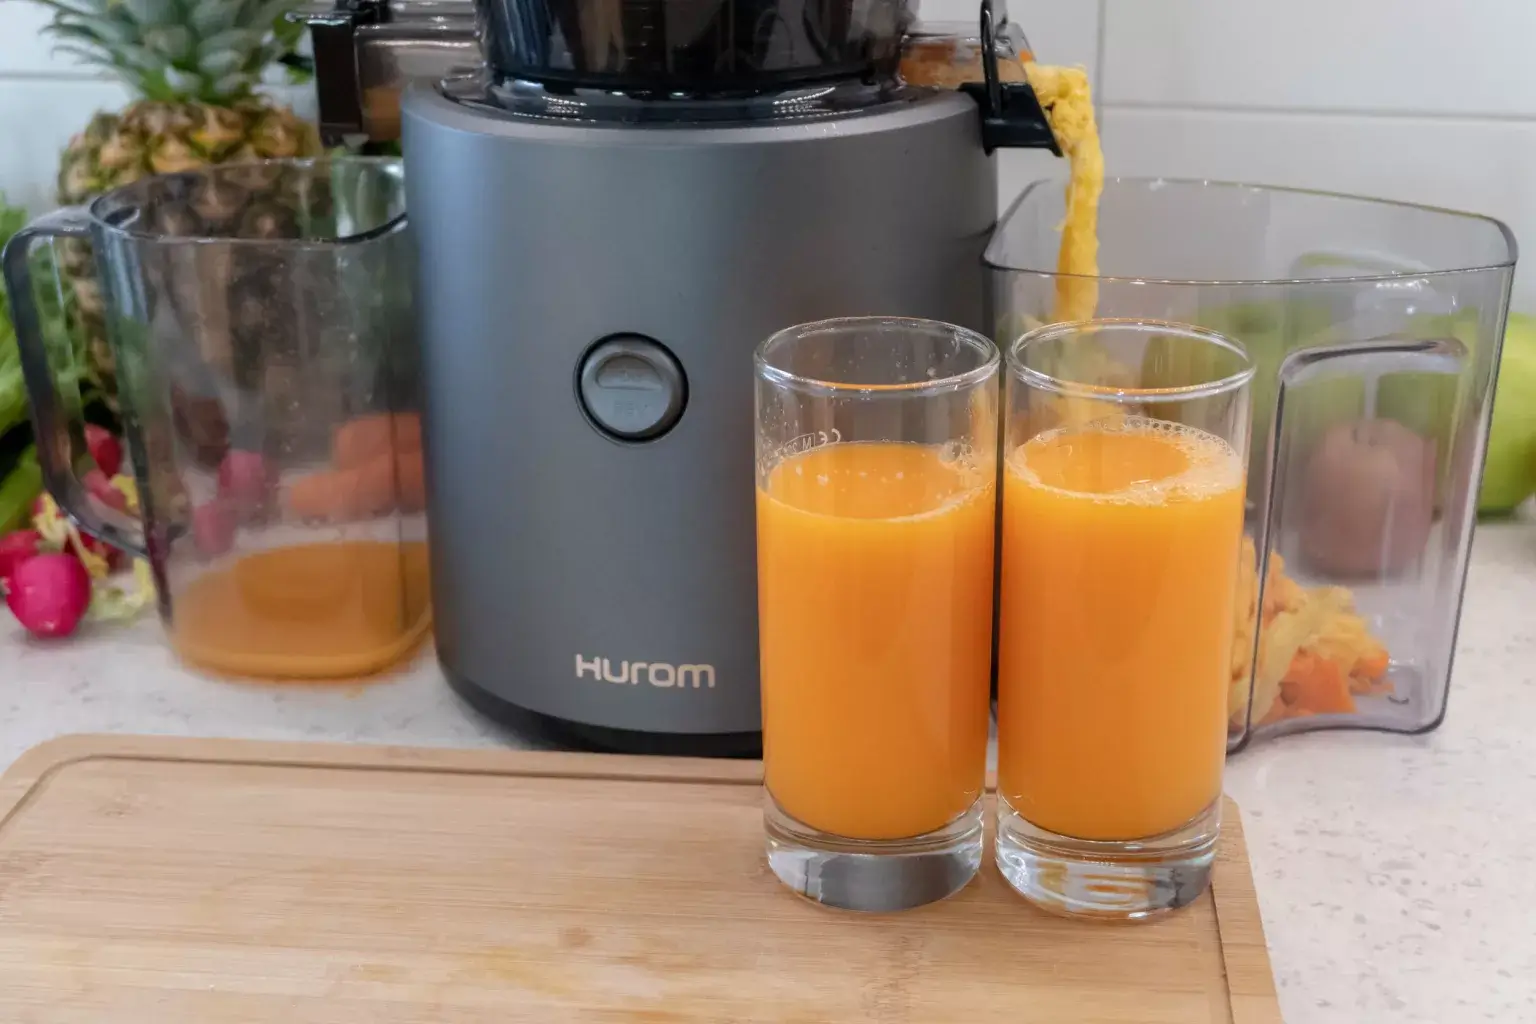 Cold pressed juice made with Hurom H320N slow juicer